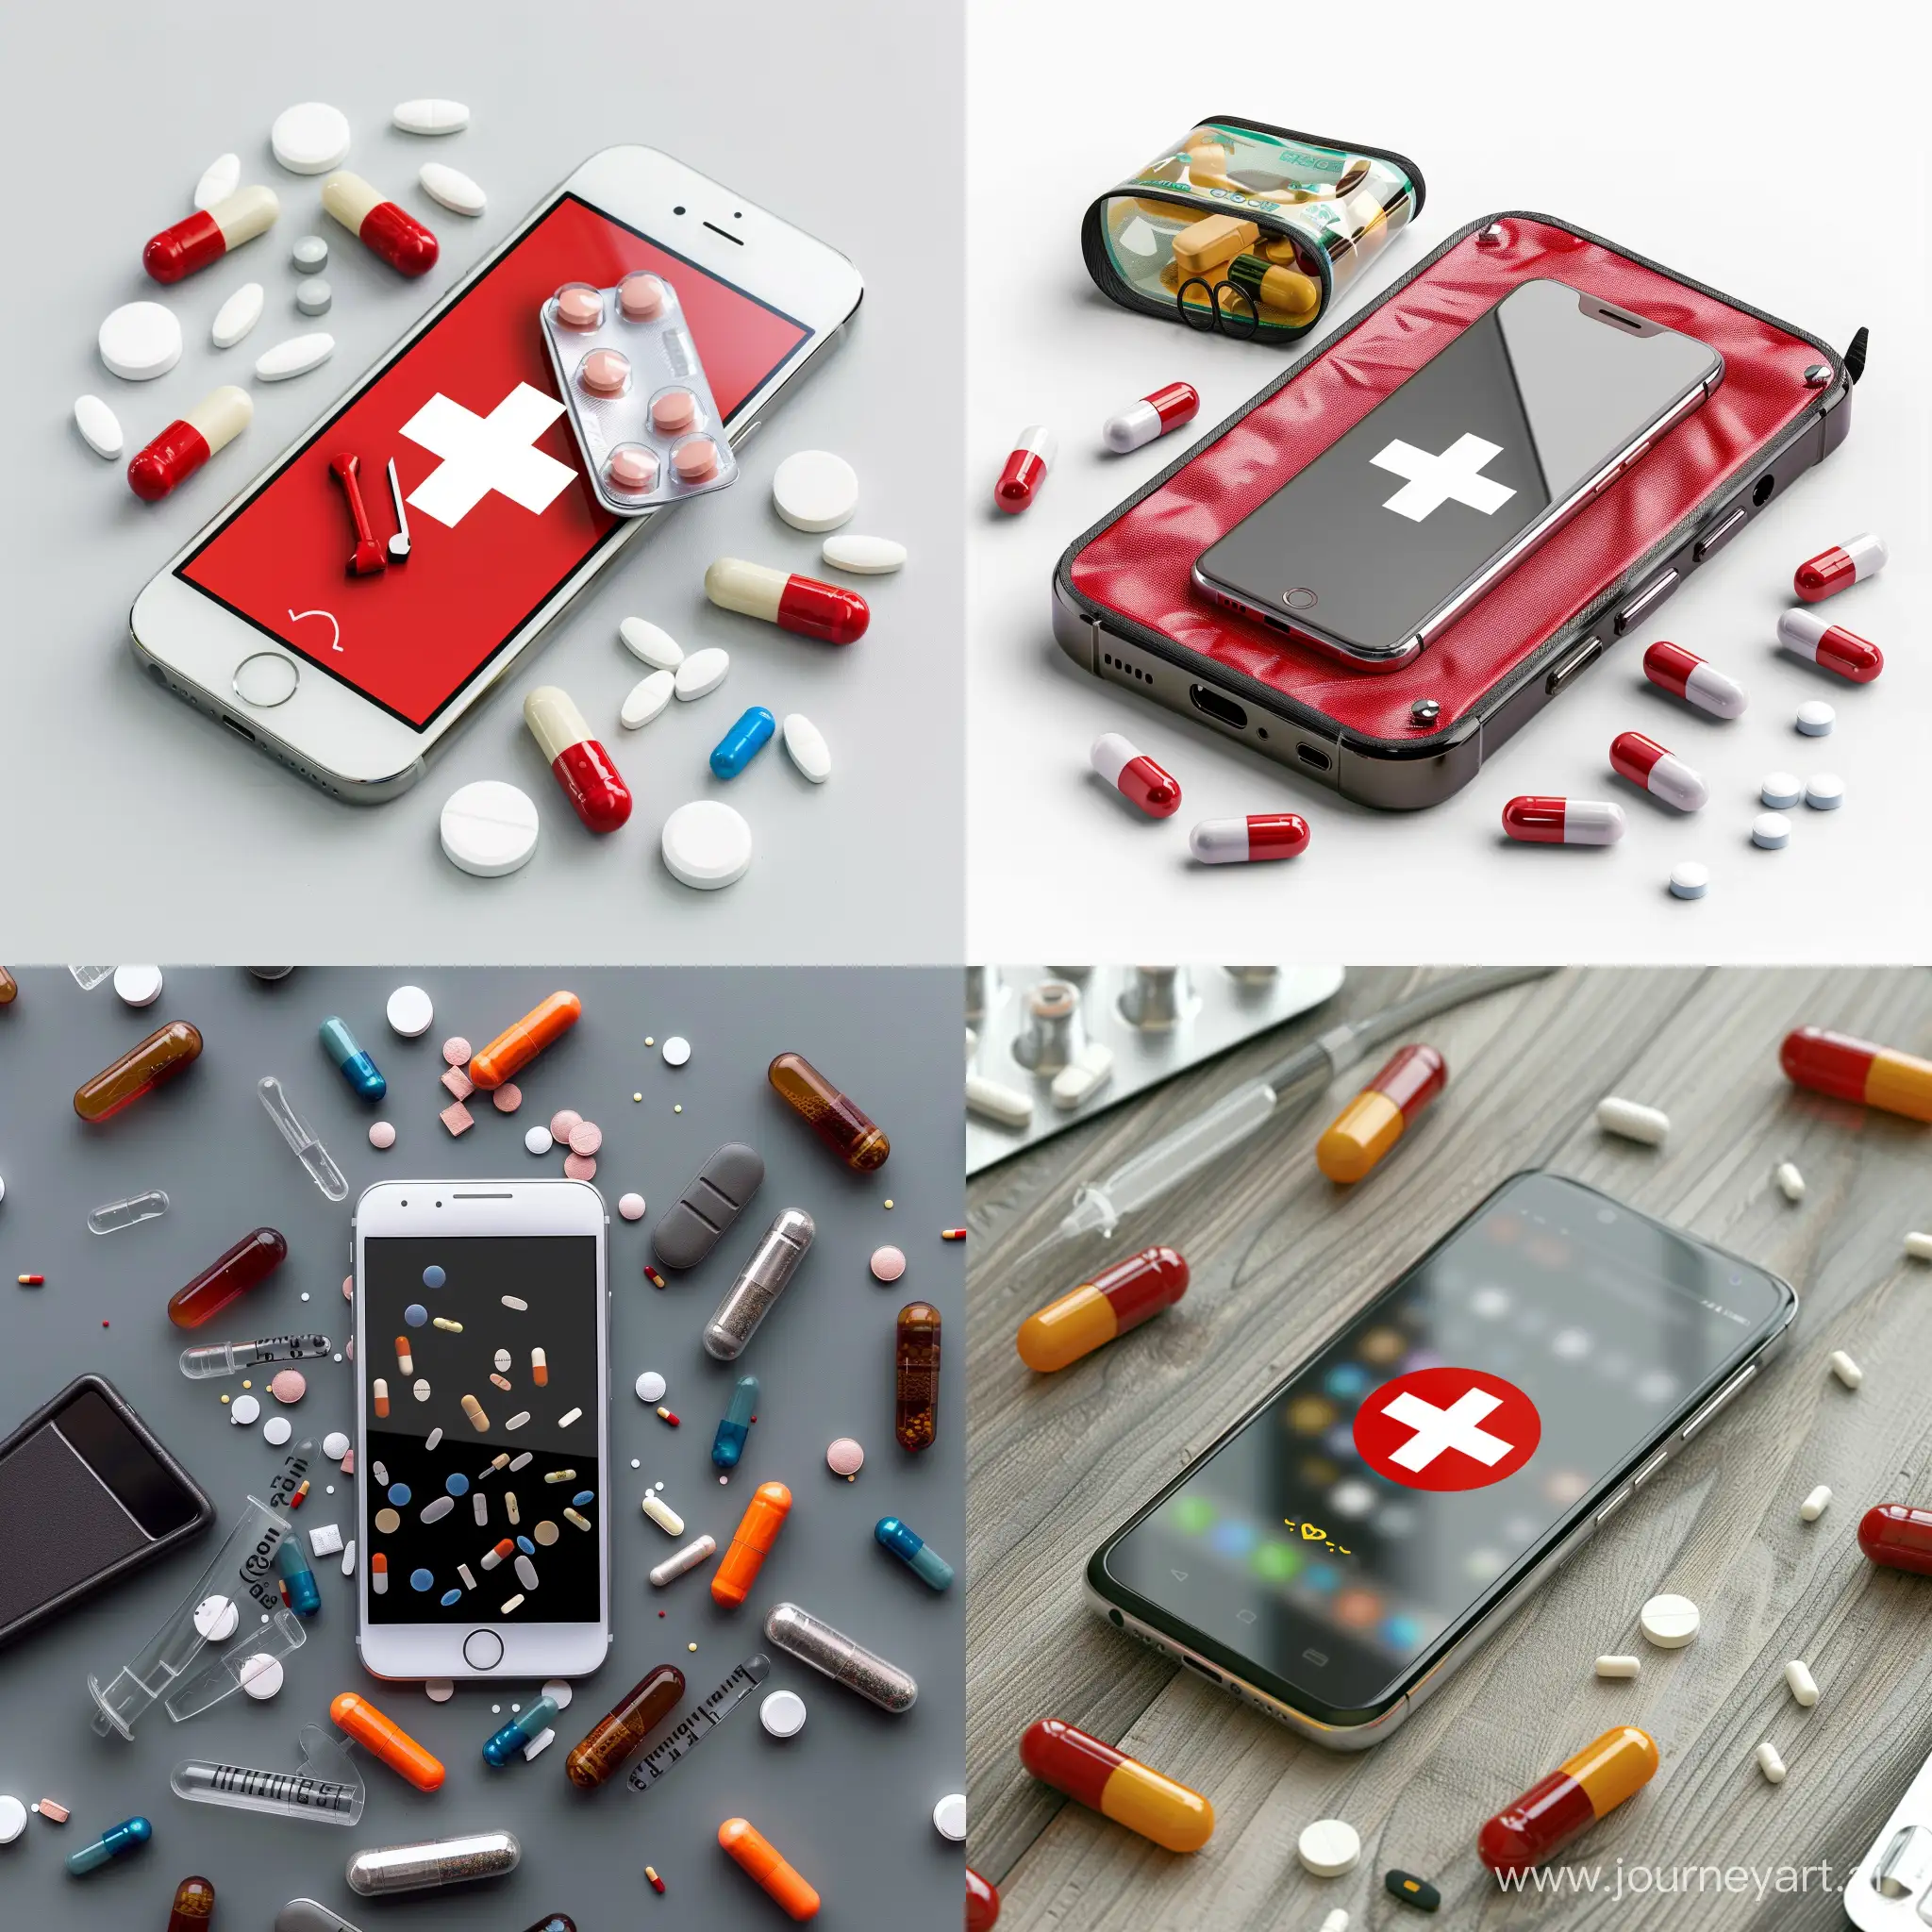 Swift-Smartphone-and-Tablet-Repair-Expert-Emergency-Assistance-and-Medication